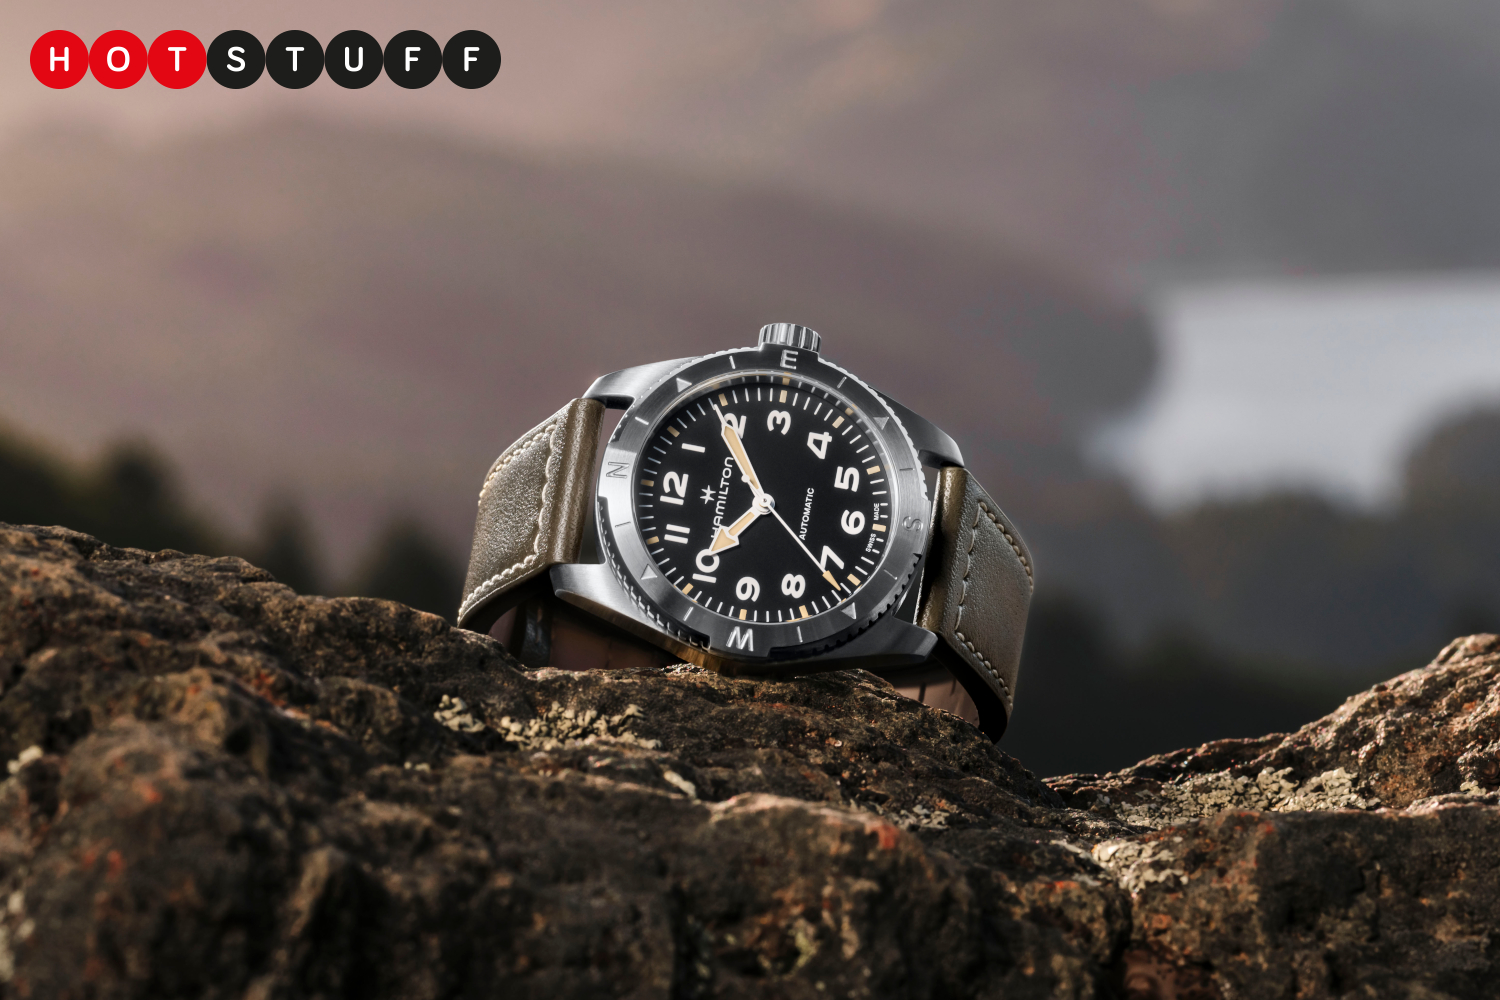 I think the Hamilton Khaki Expedition is the brand's most exciting